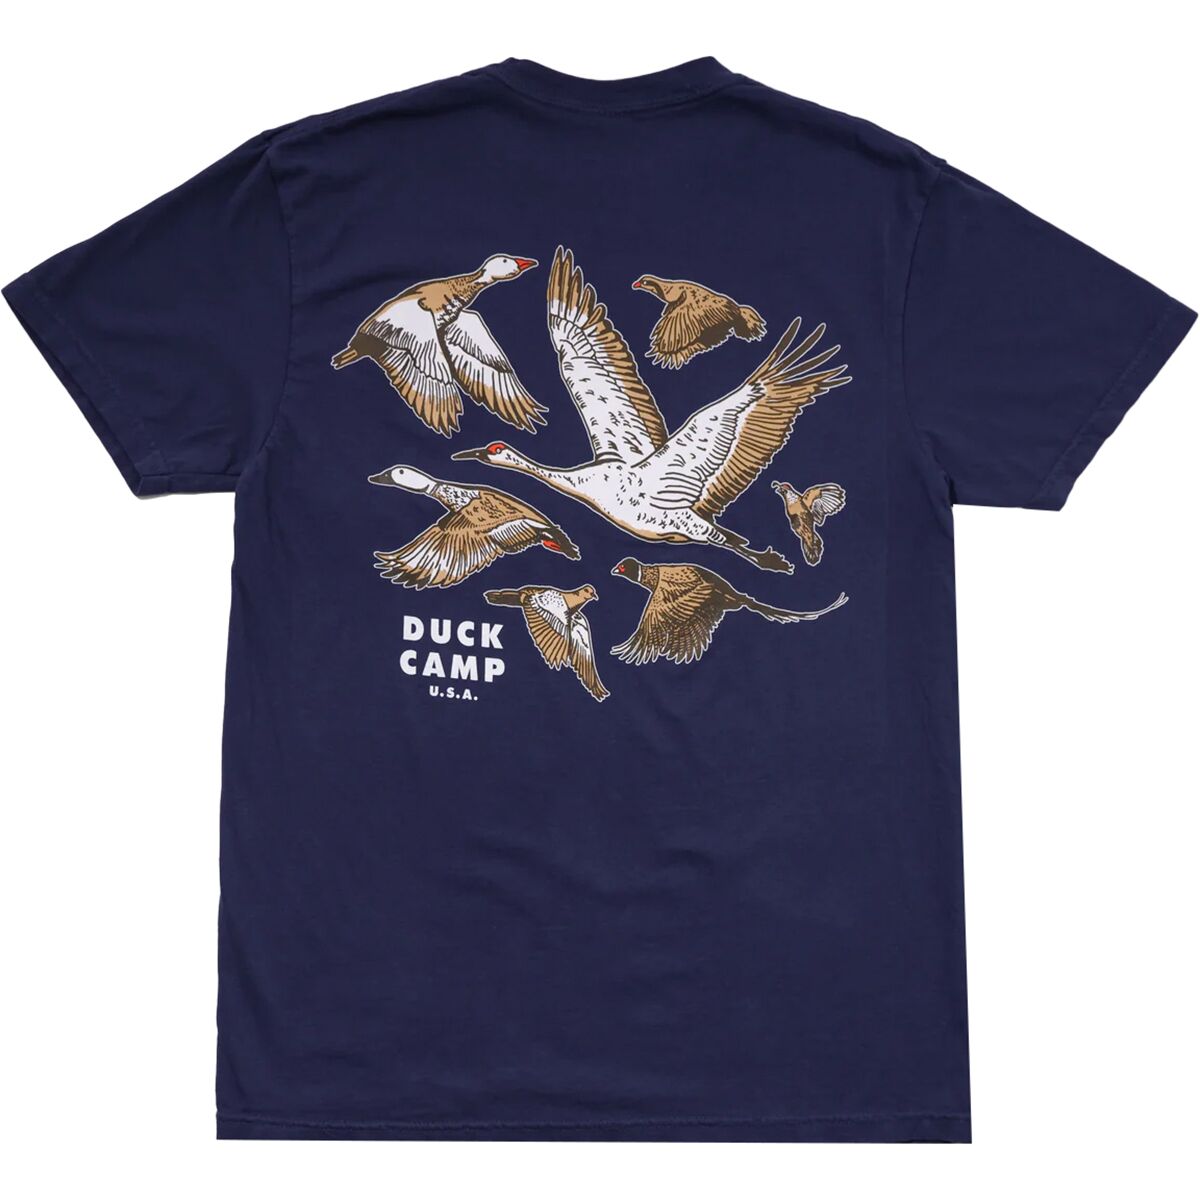 Duck Camp Birds of a Feather Graphic T-Shirt - Men's